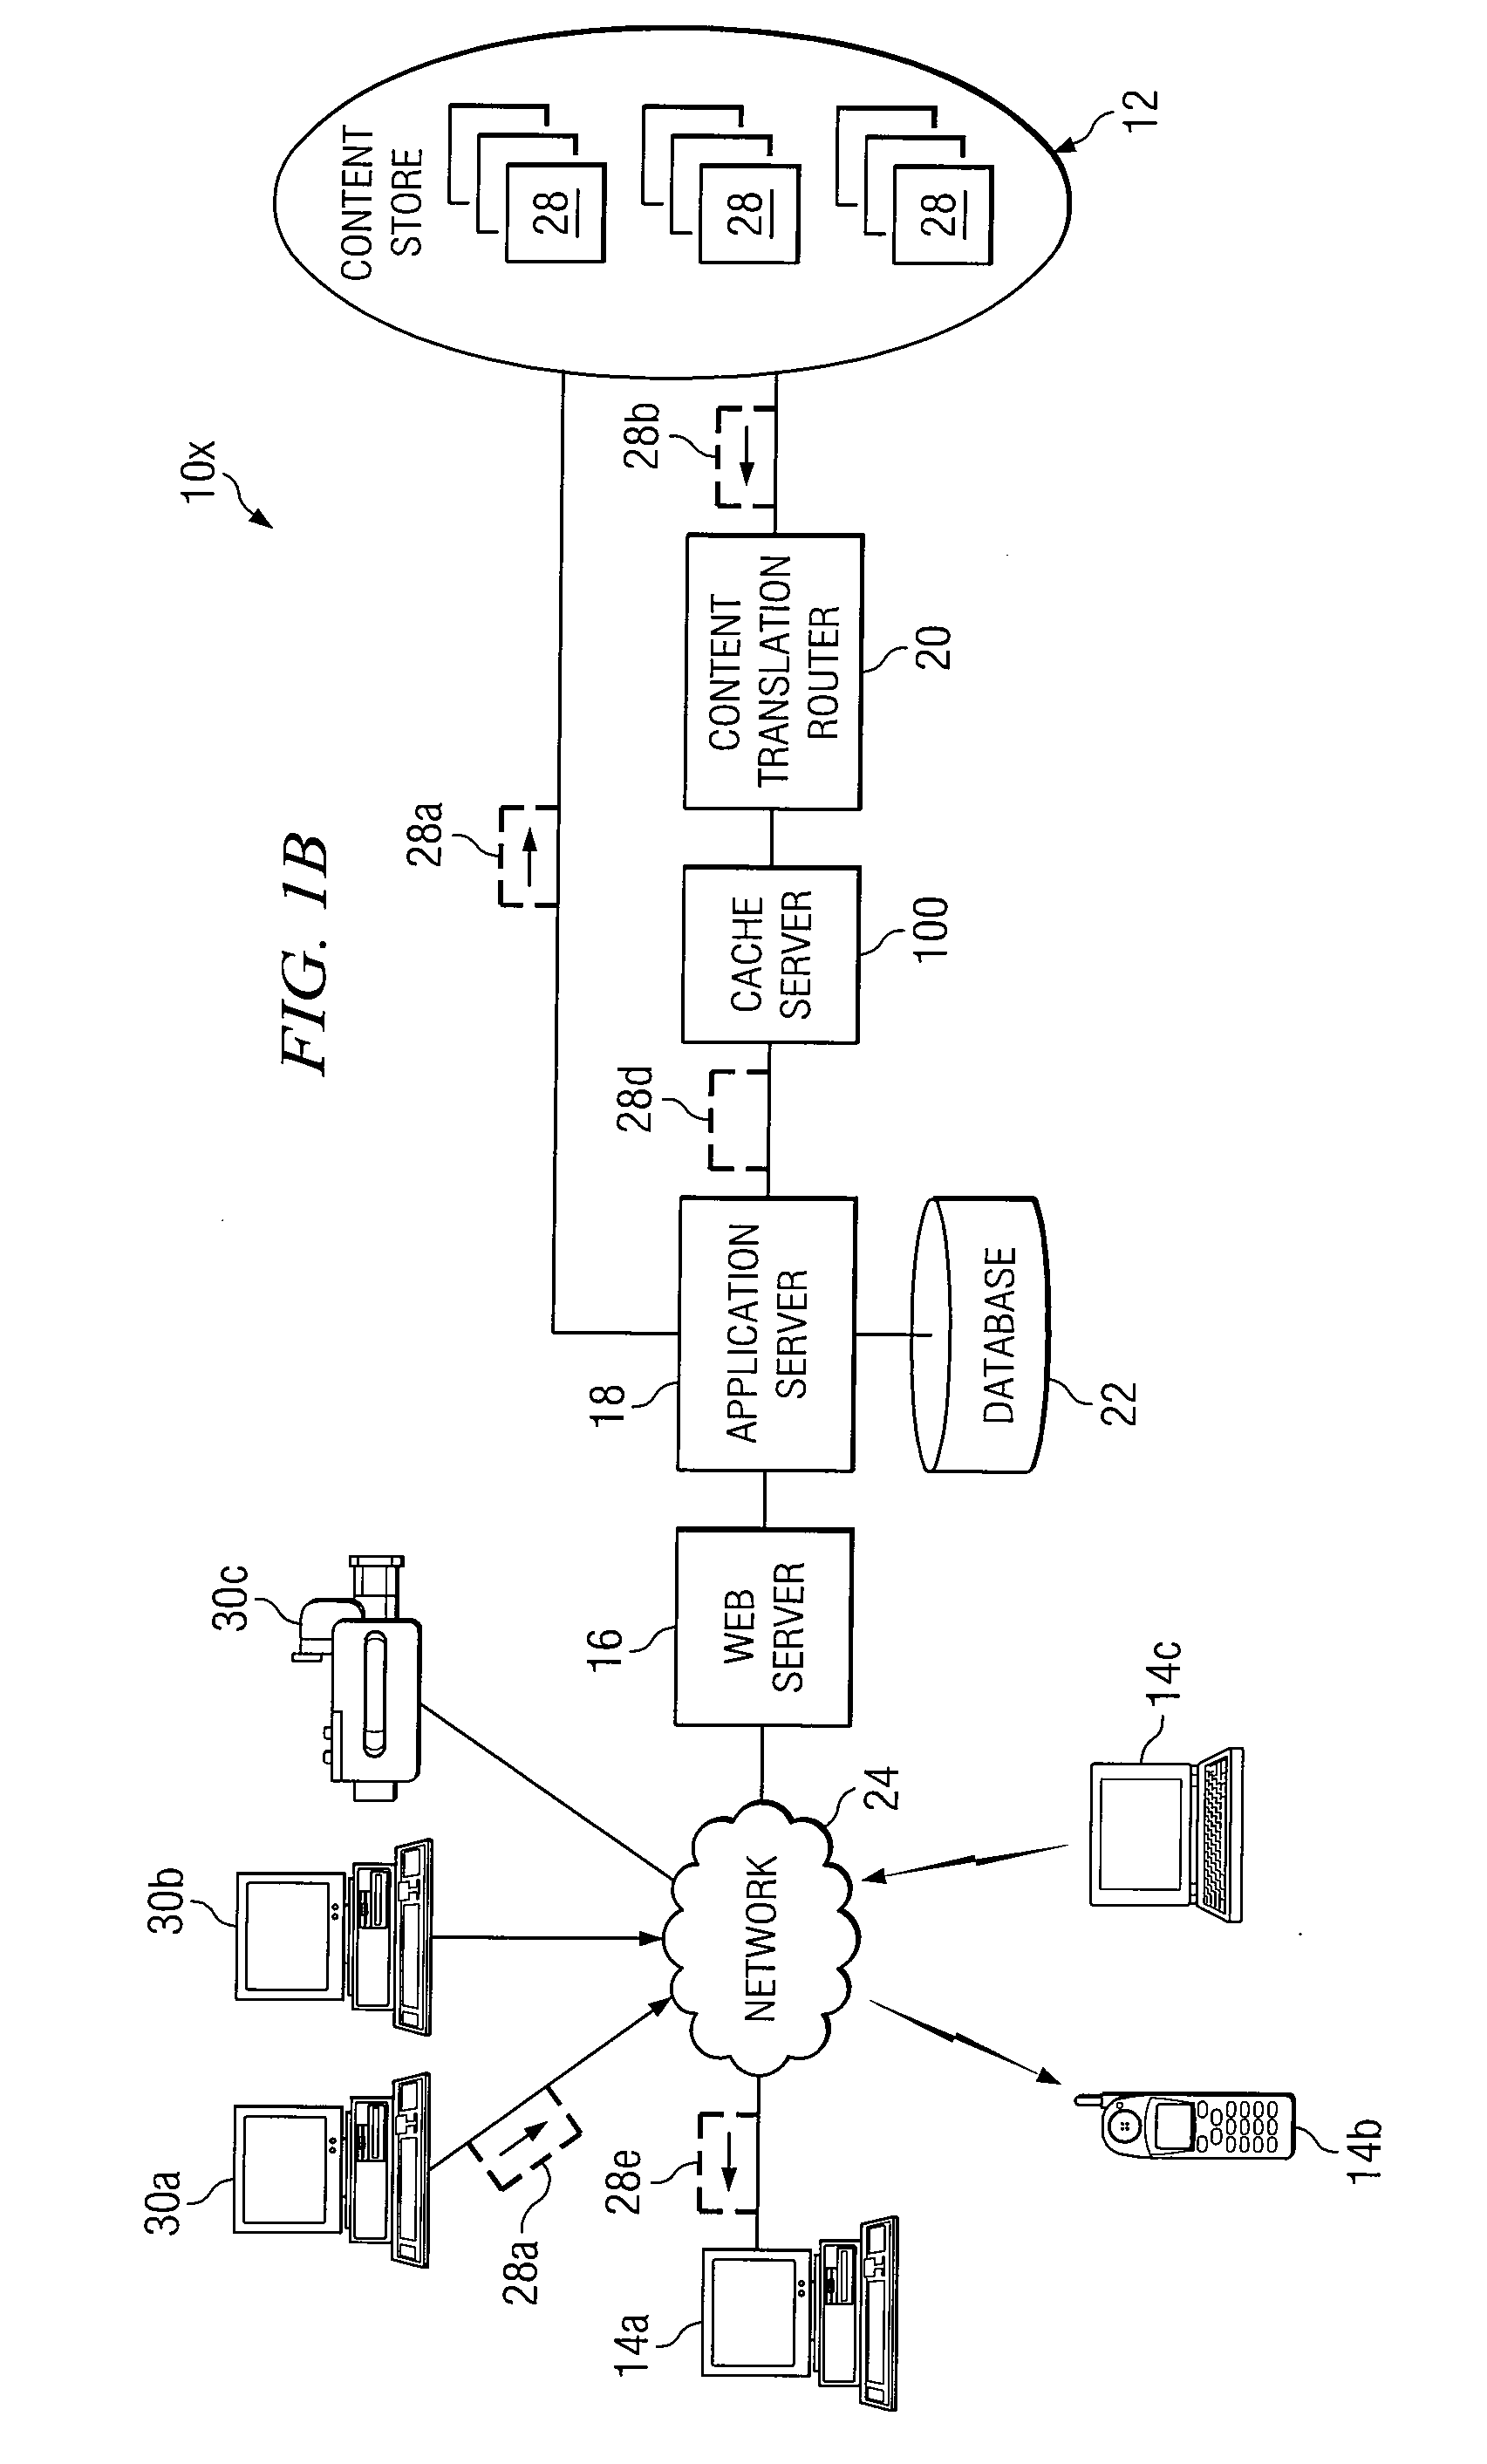 System and method for processing content